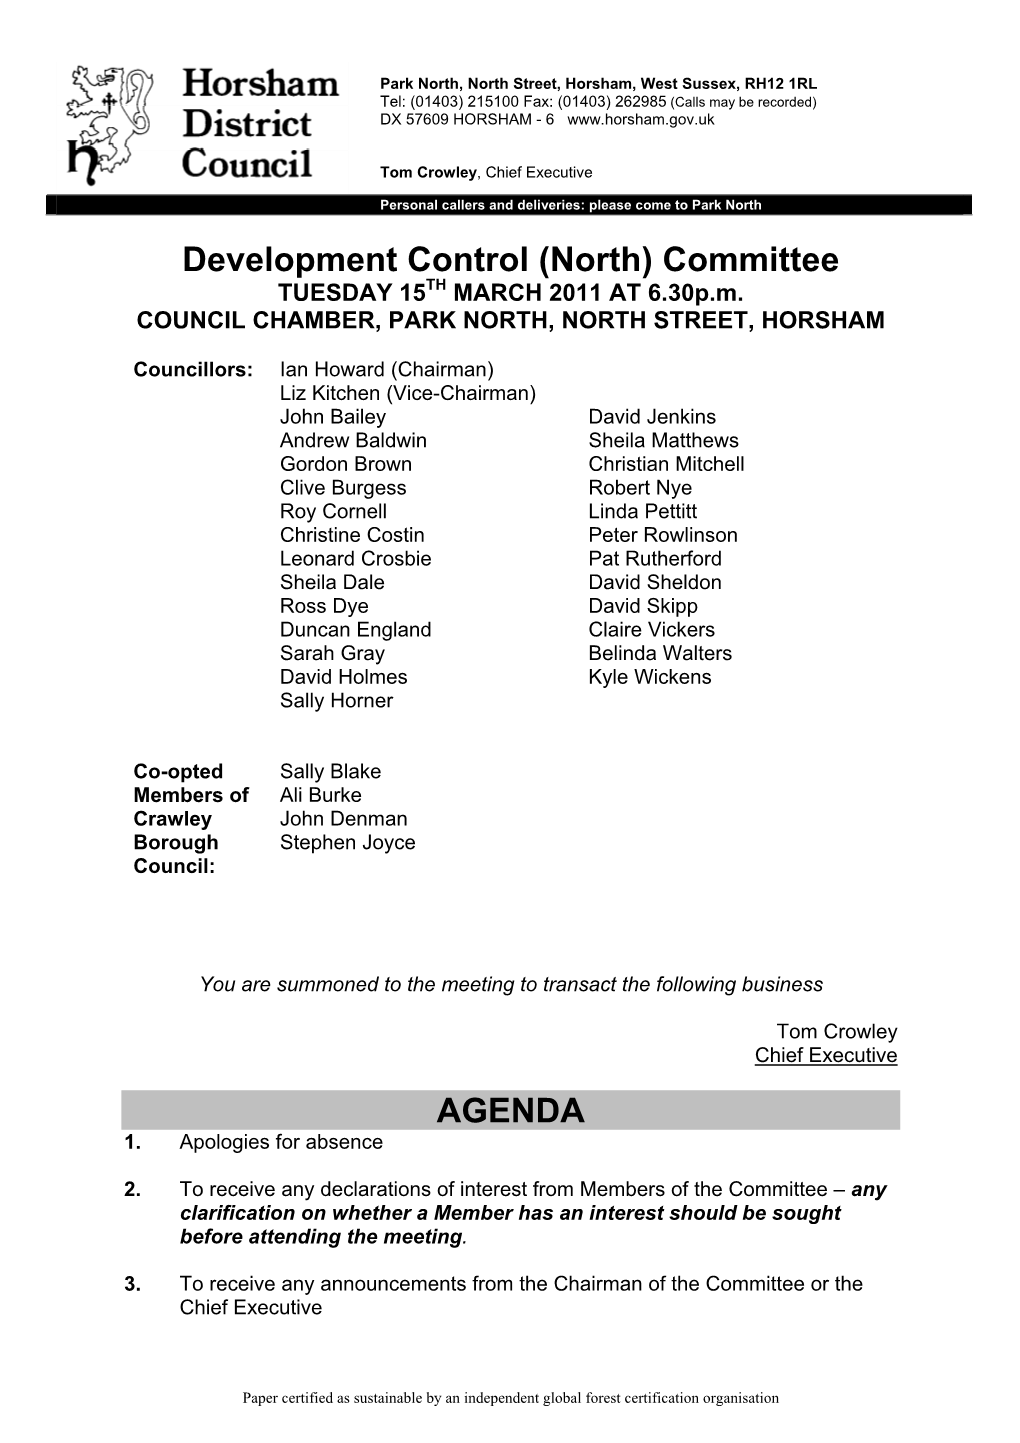 Development Control (North) Committee TUESDAY 15TH MARCH 2011 at 6.30P.M